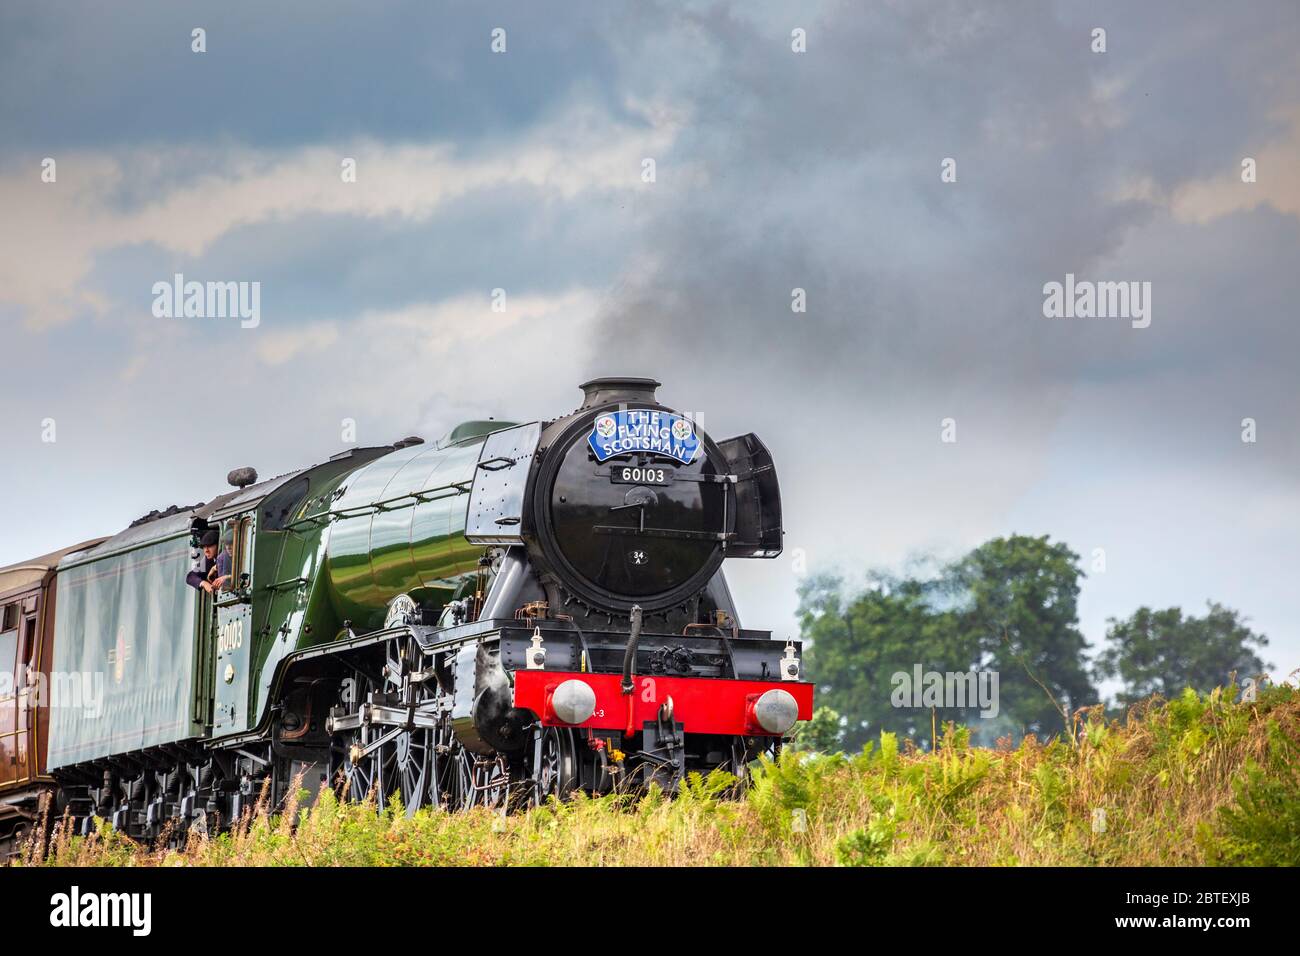 The restored Flying Scotsman steam locomotive on the Severn Valley Railway, Bewdley, England Stock Photo